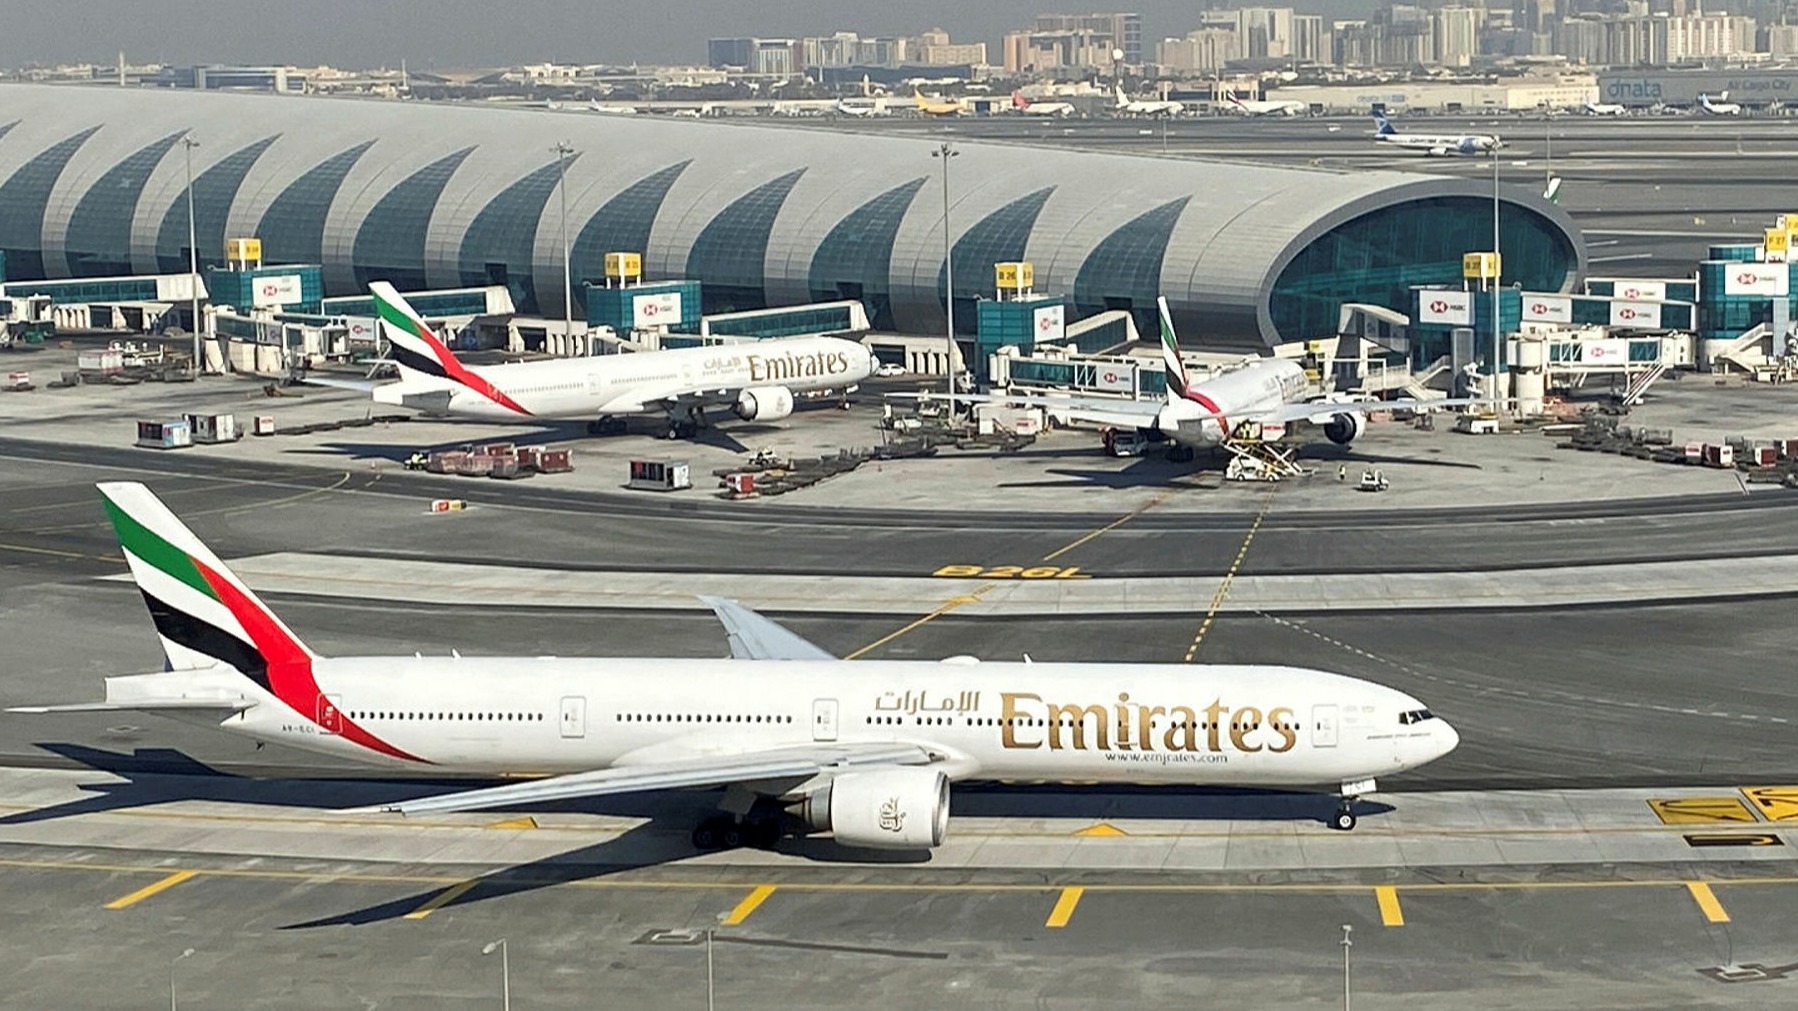 Emirates posts $5.5bn loss as pandemic takes 'tremendous toll' | Financial Times